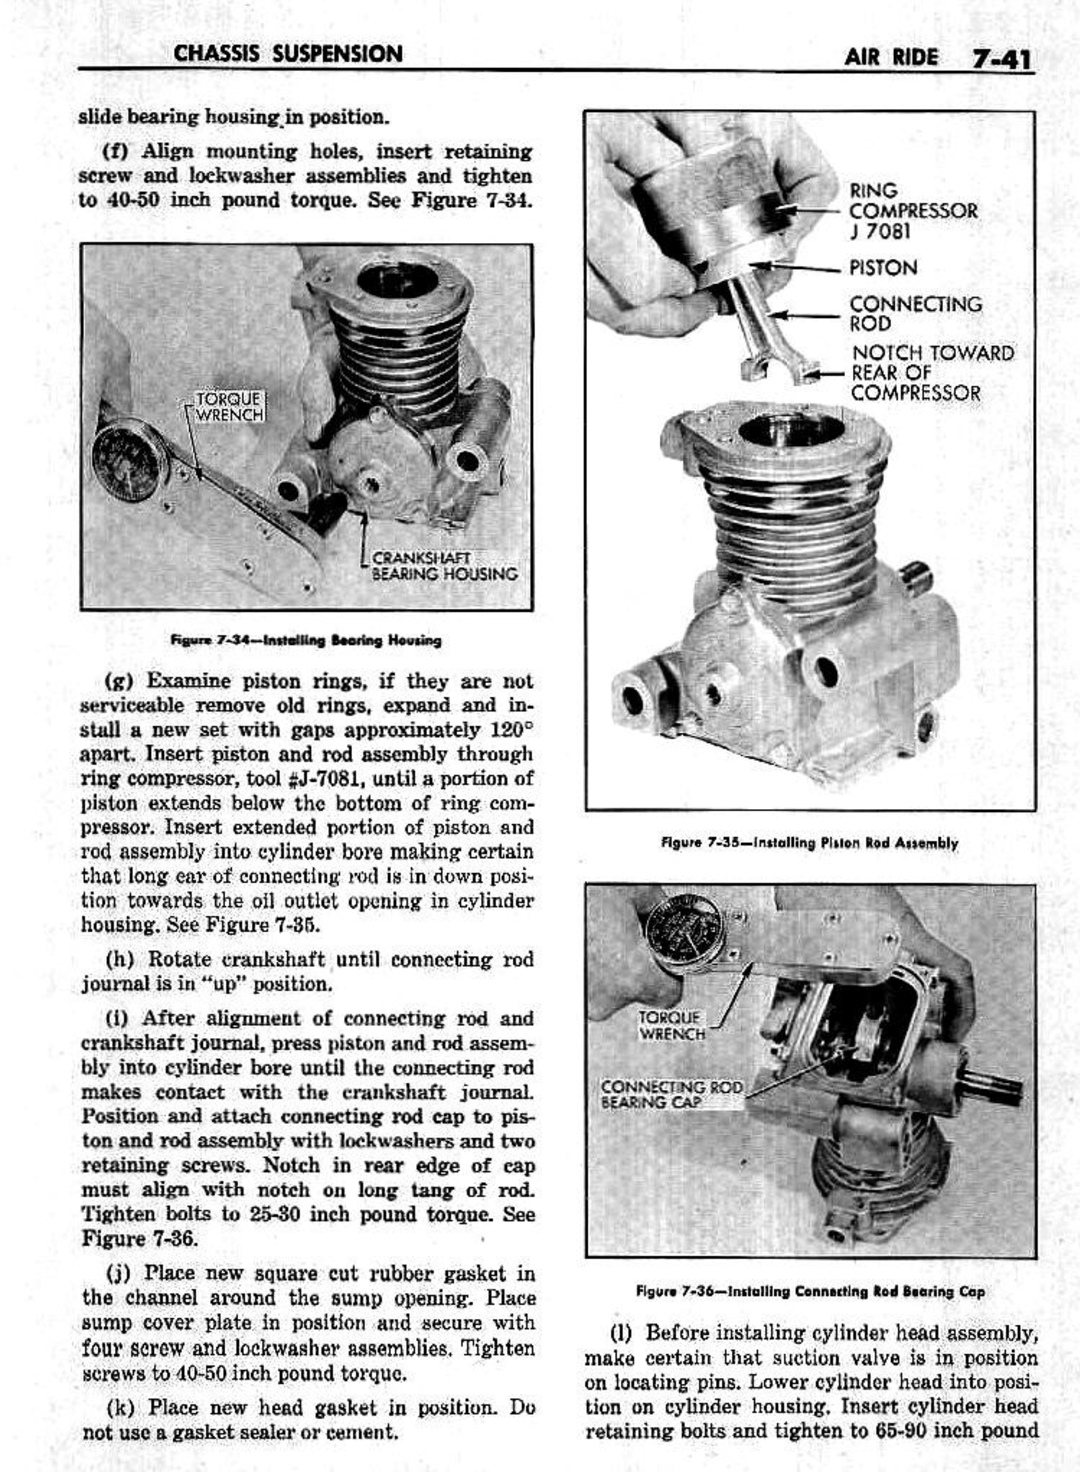 n_08 1959 Buick Shop Manual - Chassis Suspension-041-041.jpg